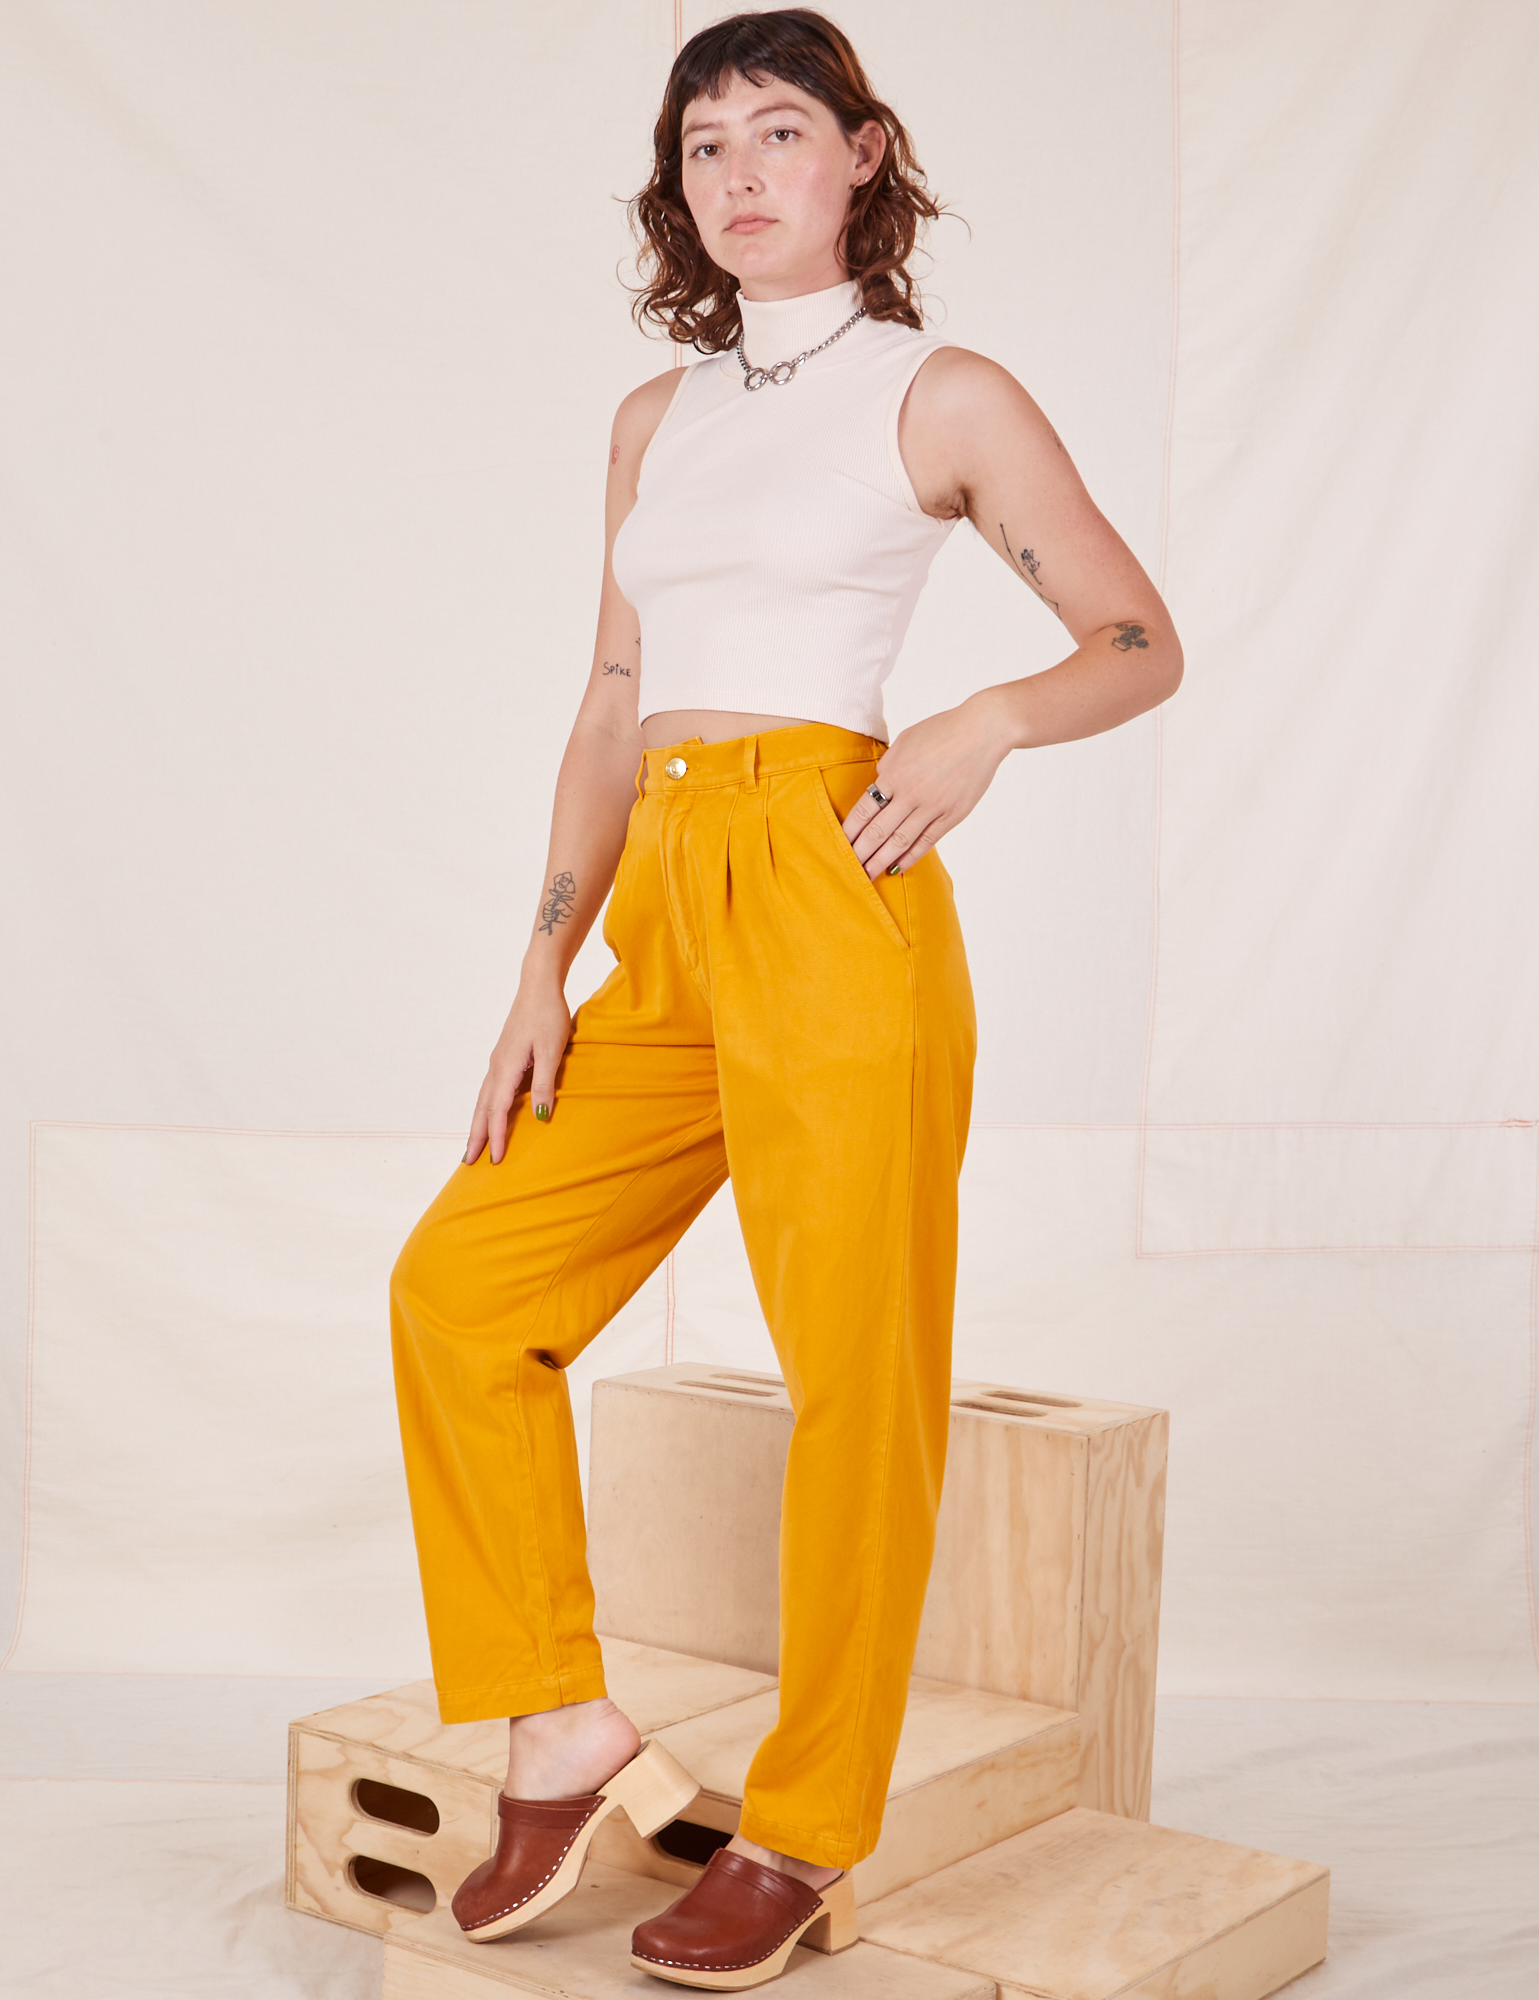 Alex is 5'8" and wearing XXS Organic Trousers in Mustard Yellow paired with Sleeveless Turtleneck in vintage tee off-white